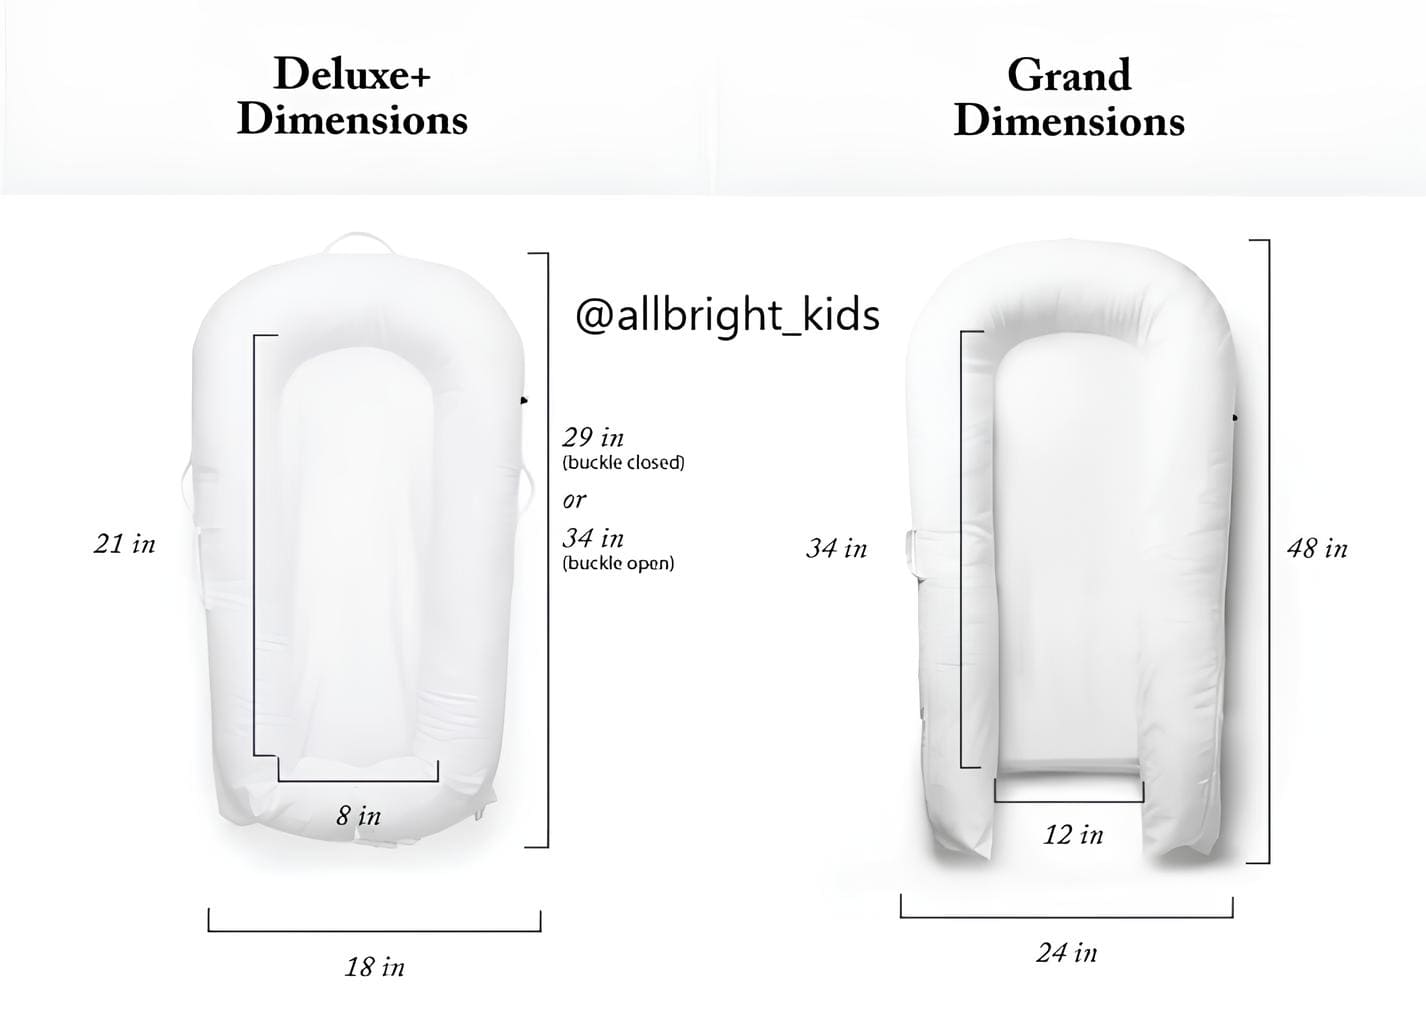 Dimensions for deluxe+ and grand white dockatot, white background, front side, AllbrightKids